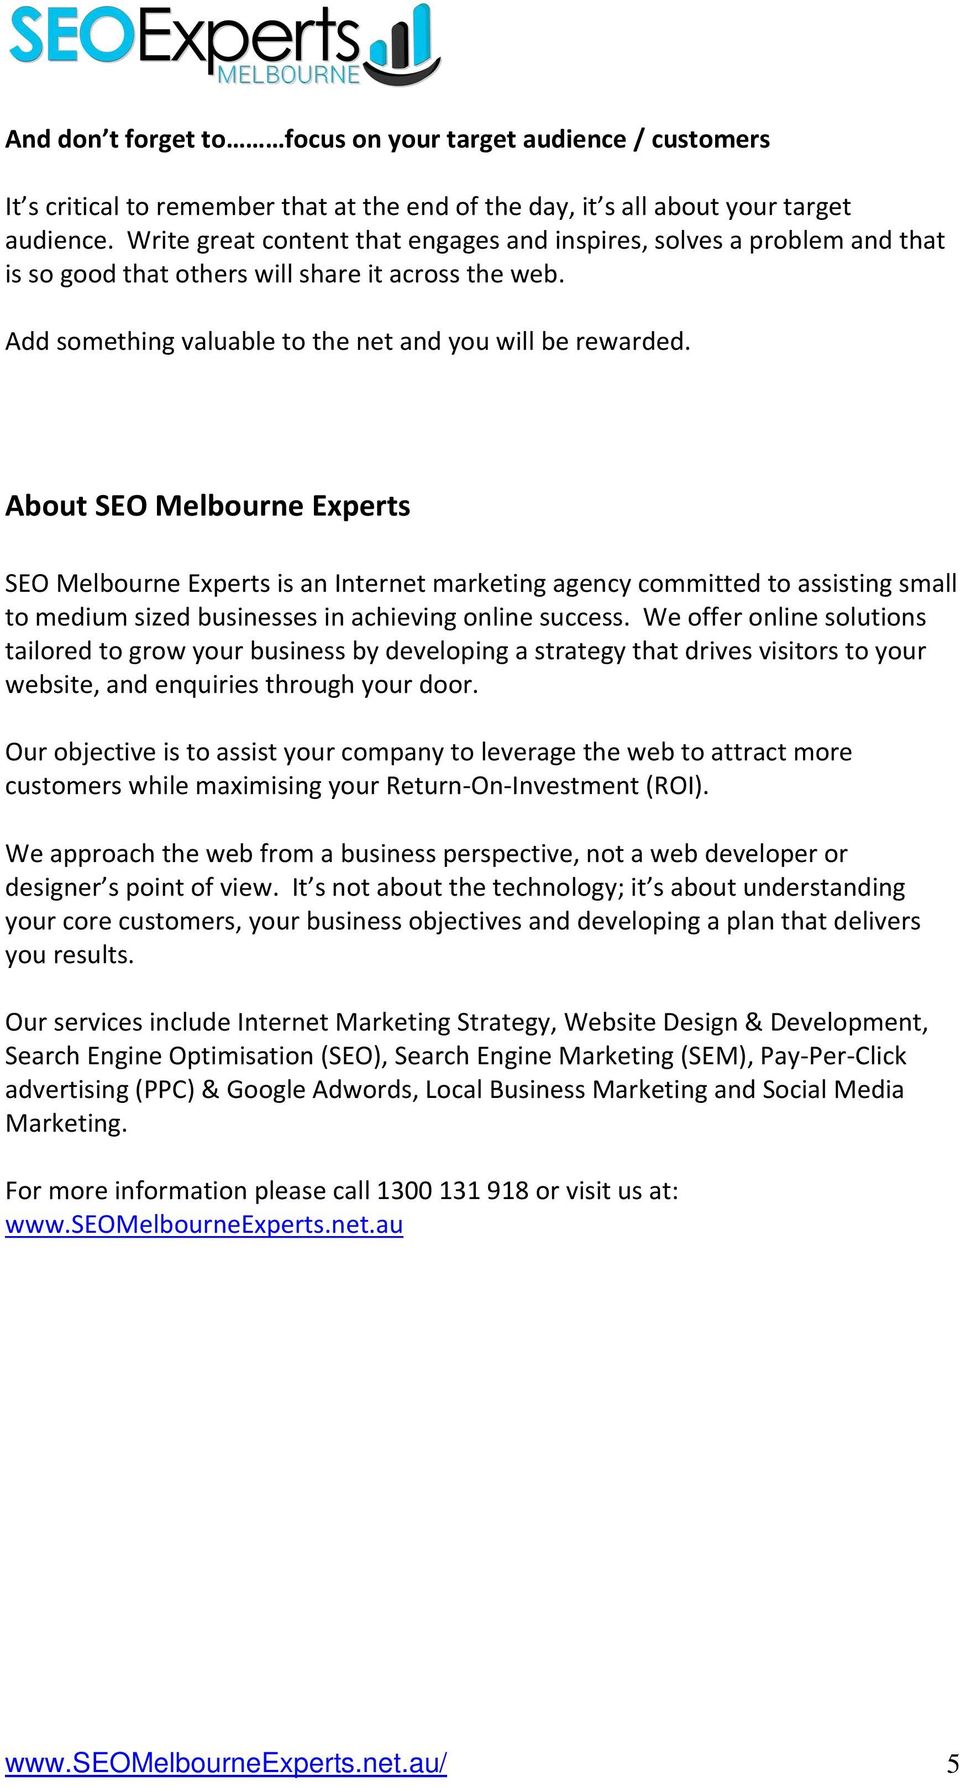 About SEO Melbourne Experts SEO Melbourne Experts is an Internet marketing agency committed to assisting small to medium sized businesses in achieving online success.